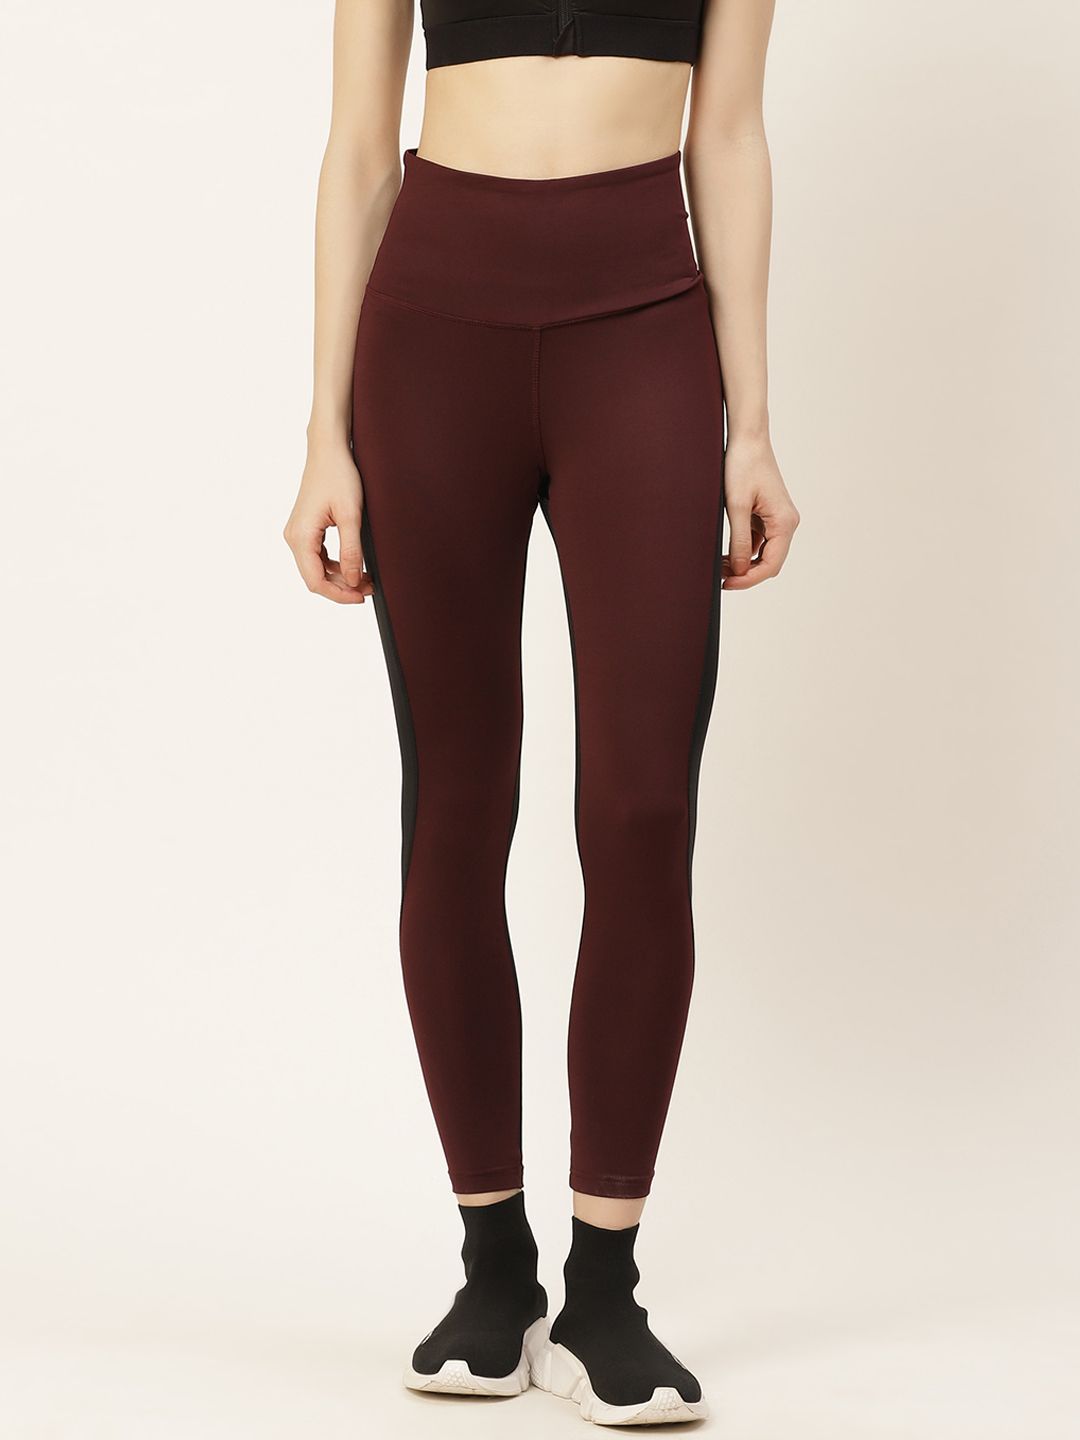 KICA Women Burgundy & Black Solid High-Rise Cropped Tights Price in India